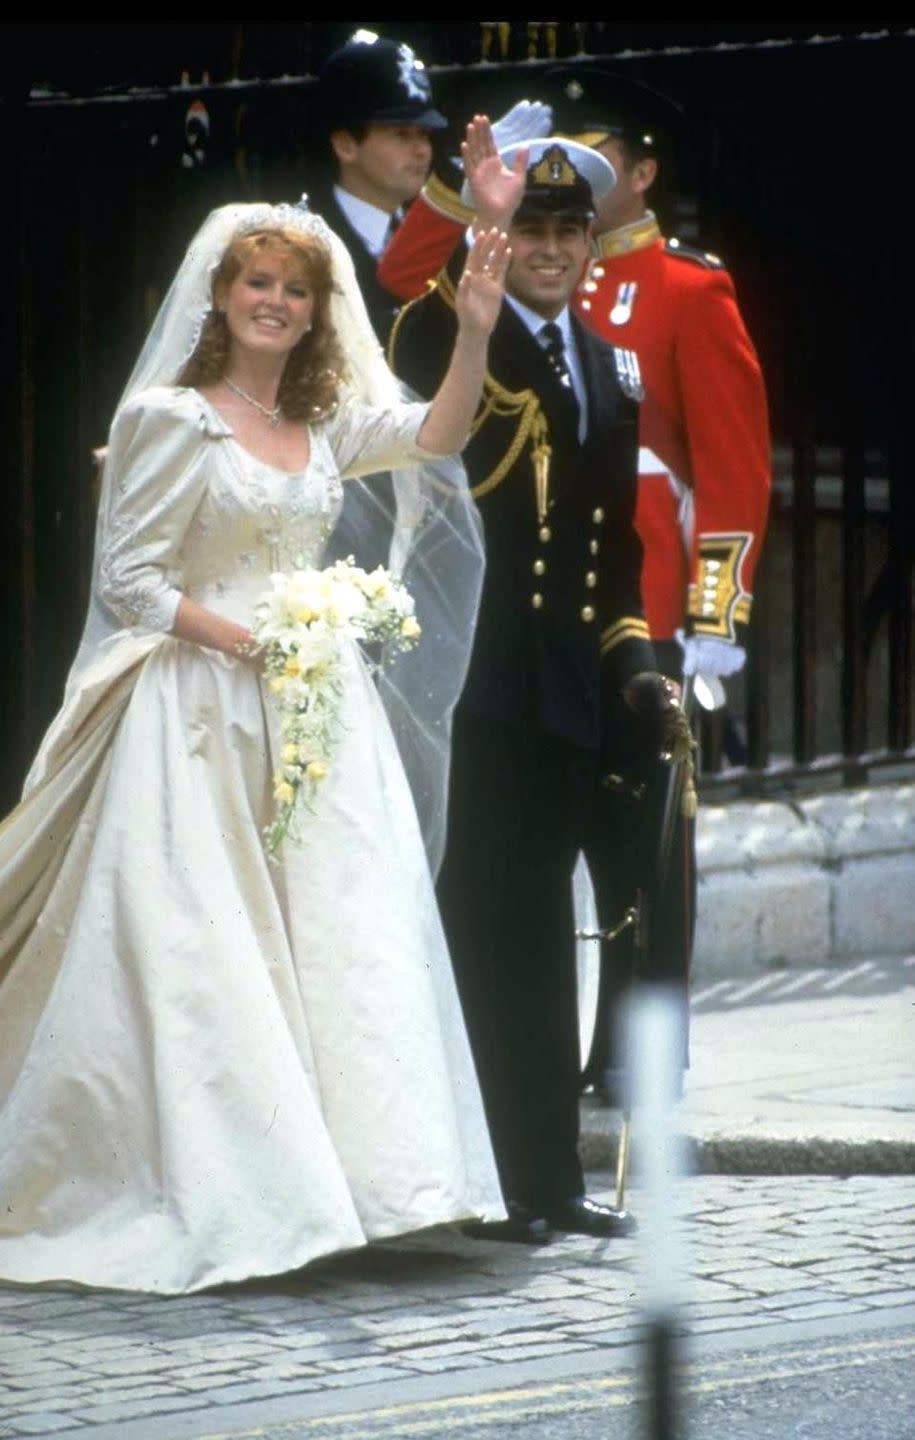 <p><a href="https://www.townandcountrymag.com/society/tradition/g11664546/scandalous-royal-romances/" rel="nofollow noopener" target="_blank" data-ylk="slk:Duchess of York Sarah Ferguson married Prince Andrew" class="link ">Duchess of York Sarah Ferguson married Prince Andrew</a> on July 23, 1986 at Westminster Abbey. Ferguson's wedding dress, designed by <span class="redactor-unlink">Lindka Cierach,</span> featured heavy beadwork, depicting symbols that were personally significant to the couple—including hearts, anchors, thistles, and bumblebees. </p>